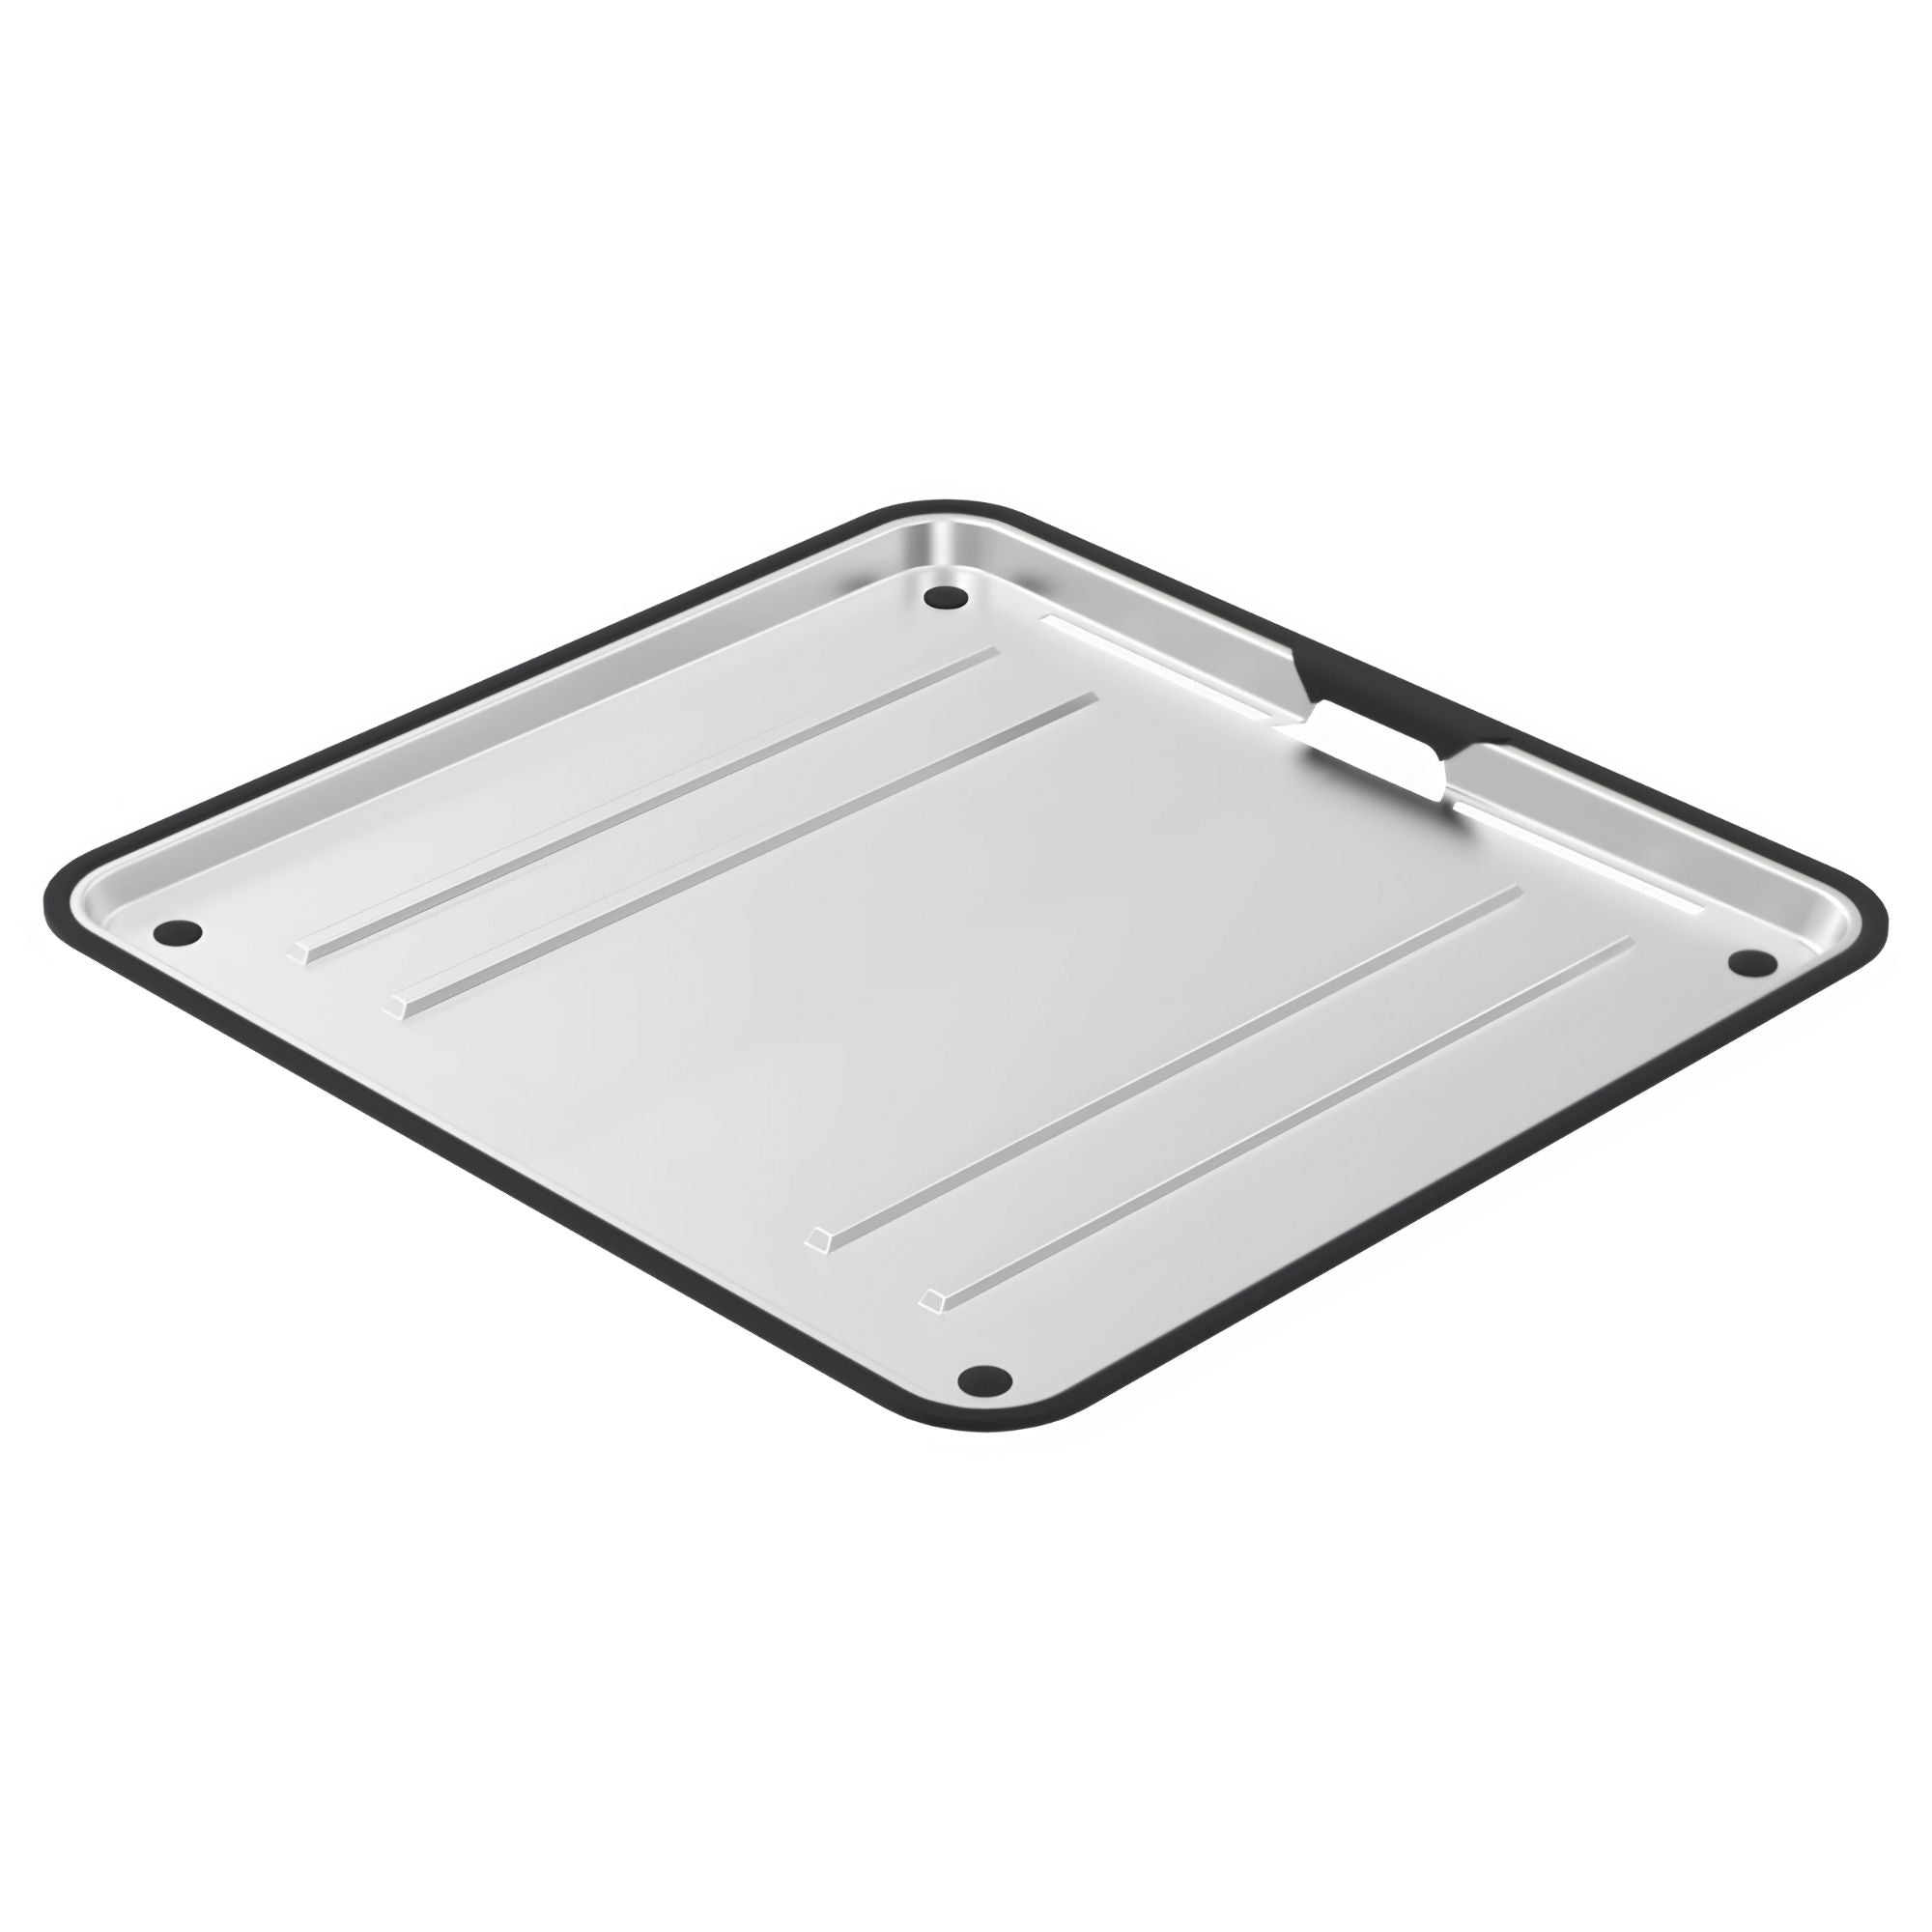 ABEY LAGO DOUBLE BOWL KITCHEN SINK STAINLESS STEEL 830MM